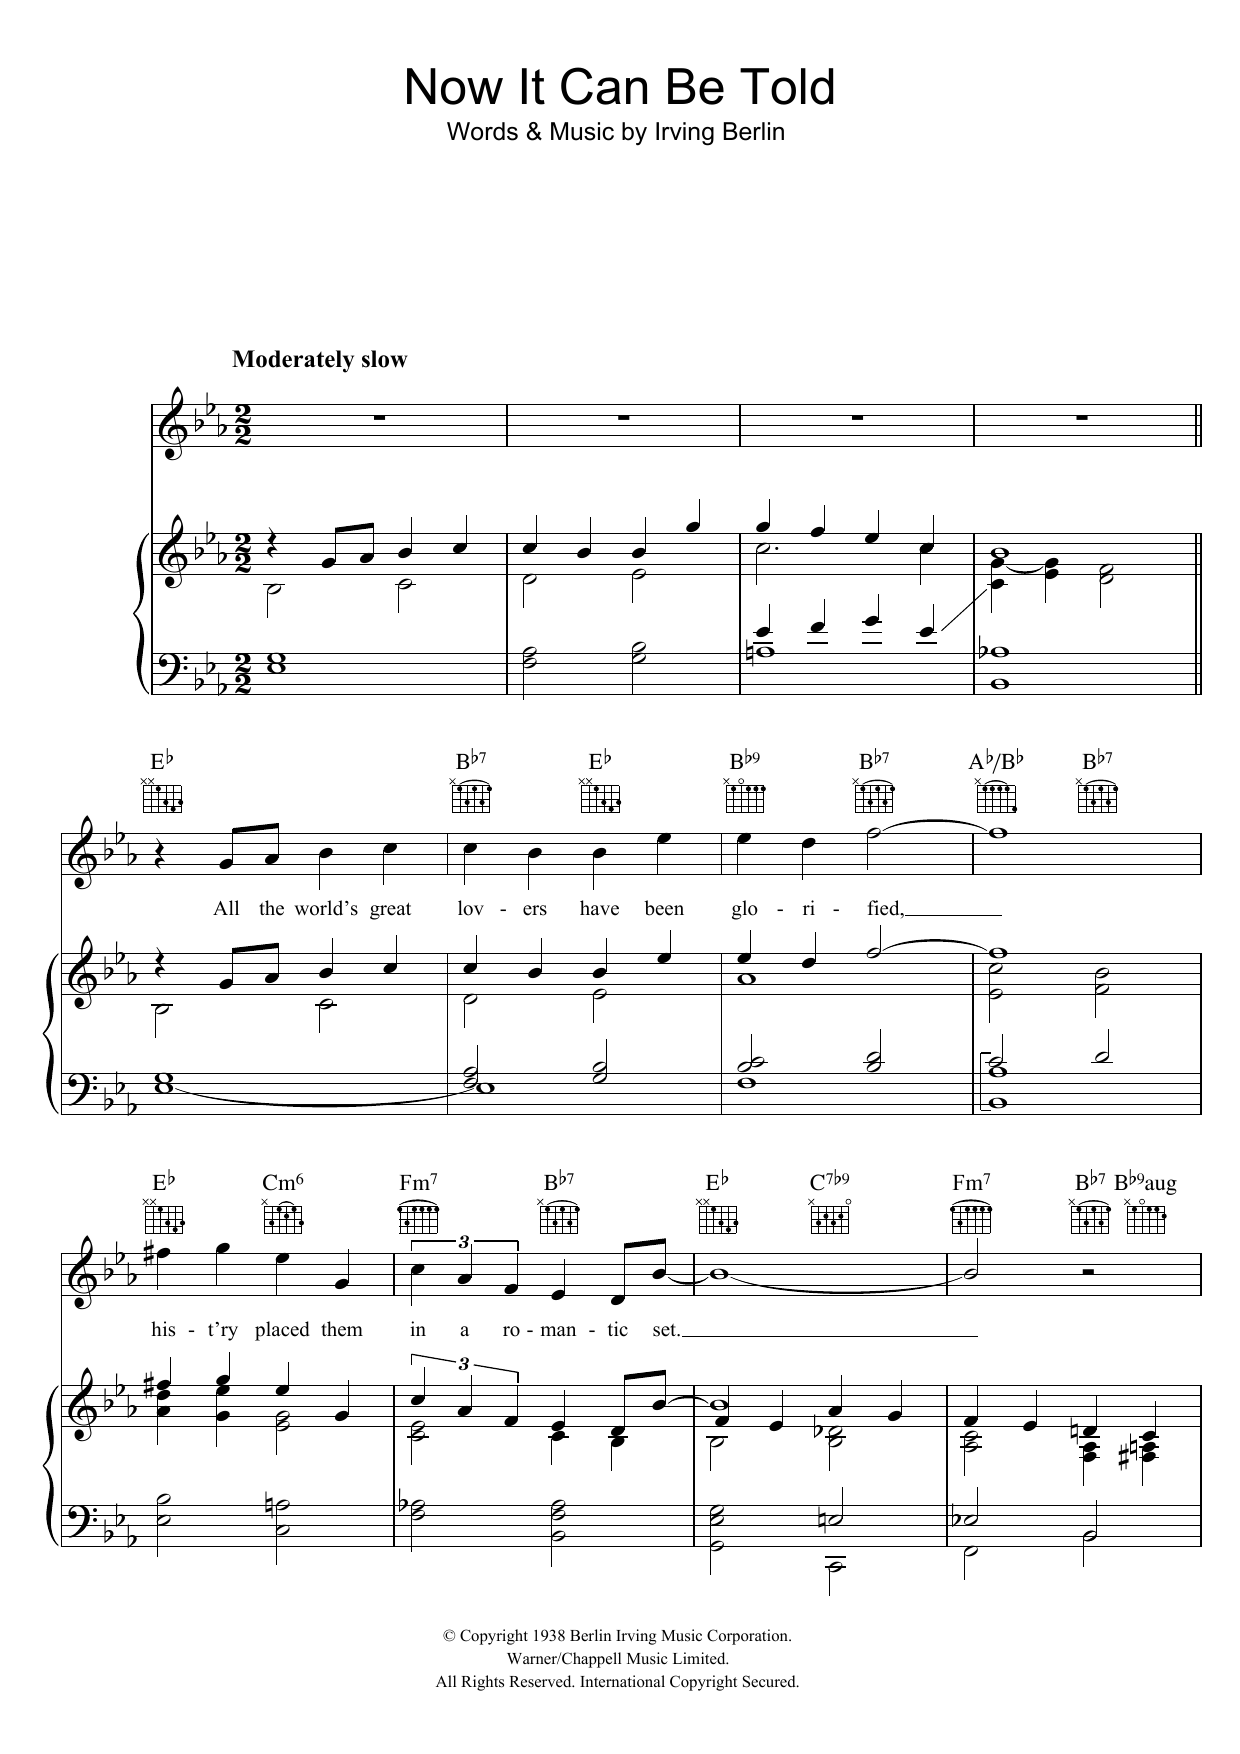 Download Irving Berlin Now It Can Be Told Sheet Music